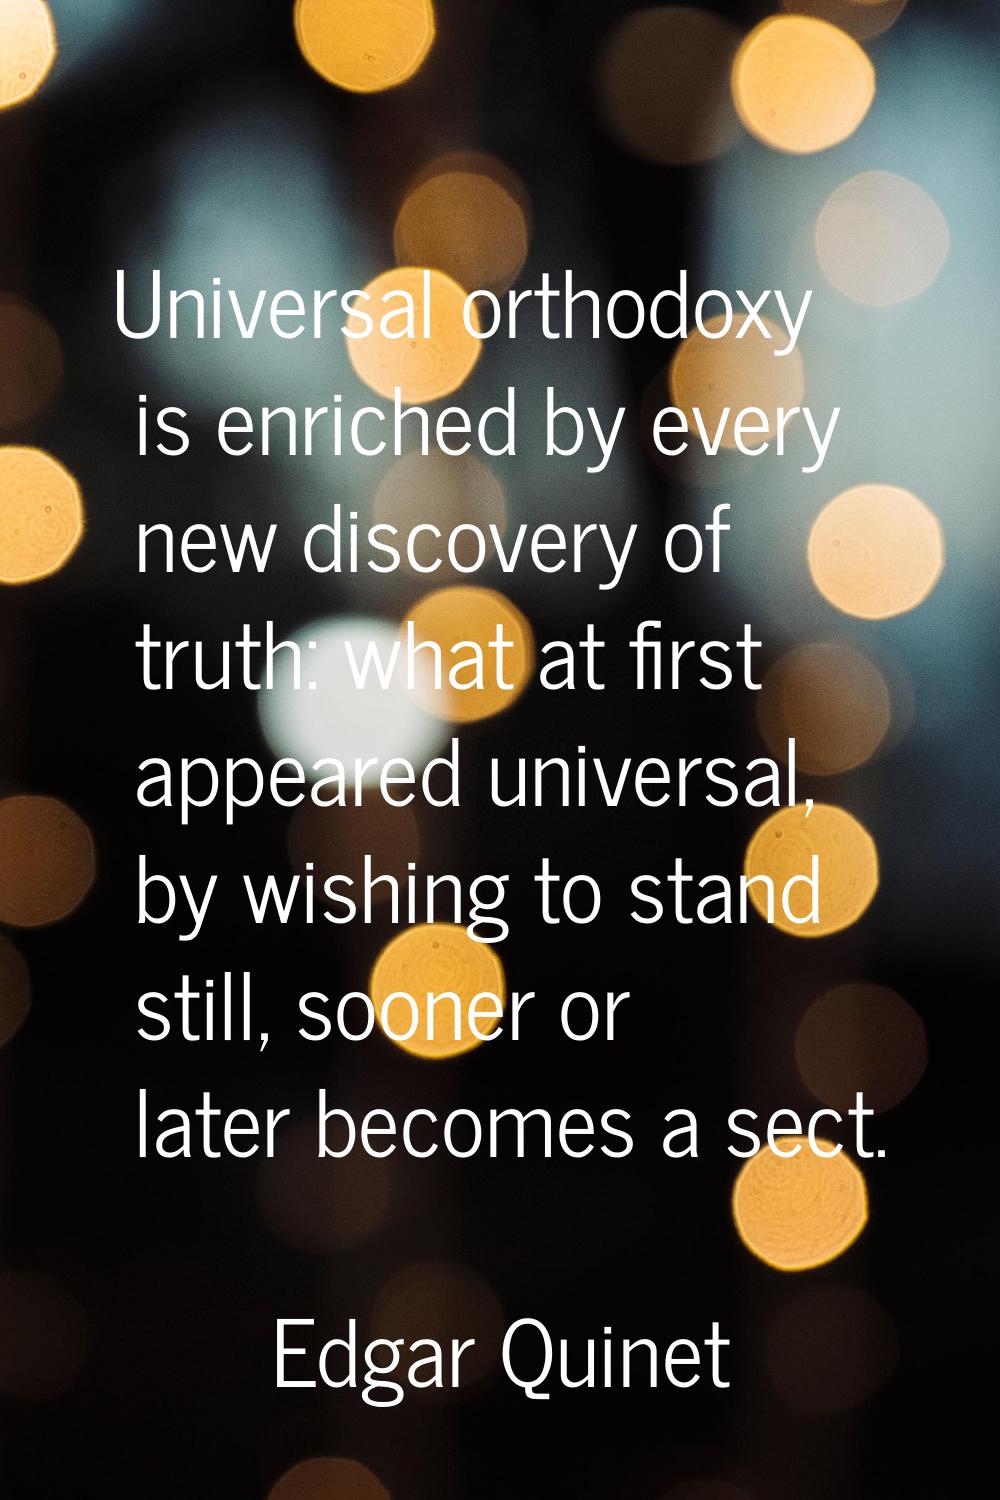 Universal orthodoxy is enriched by every new discovery of truth: what at first appeared universal, 